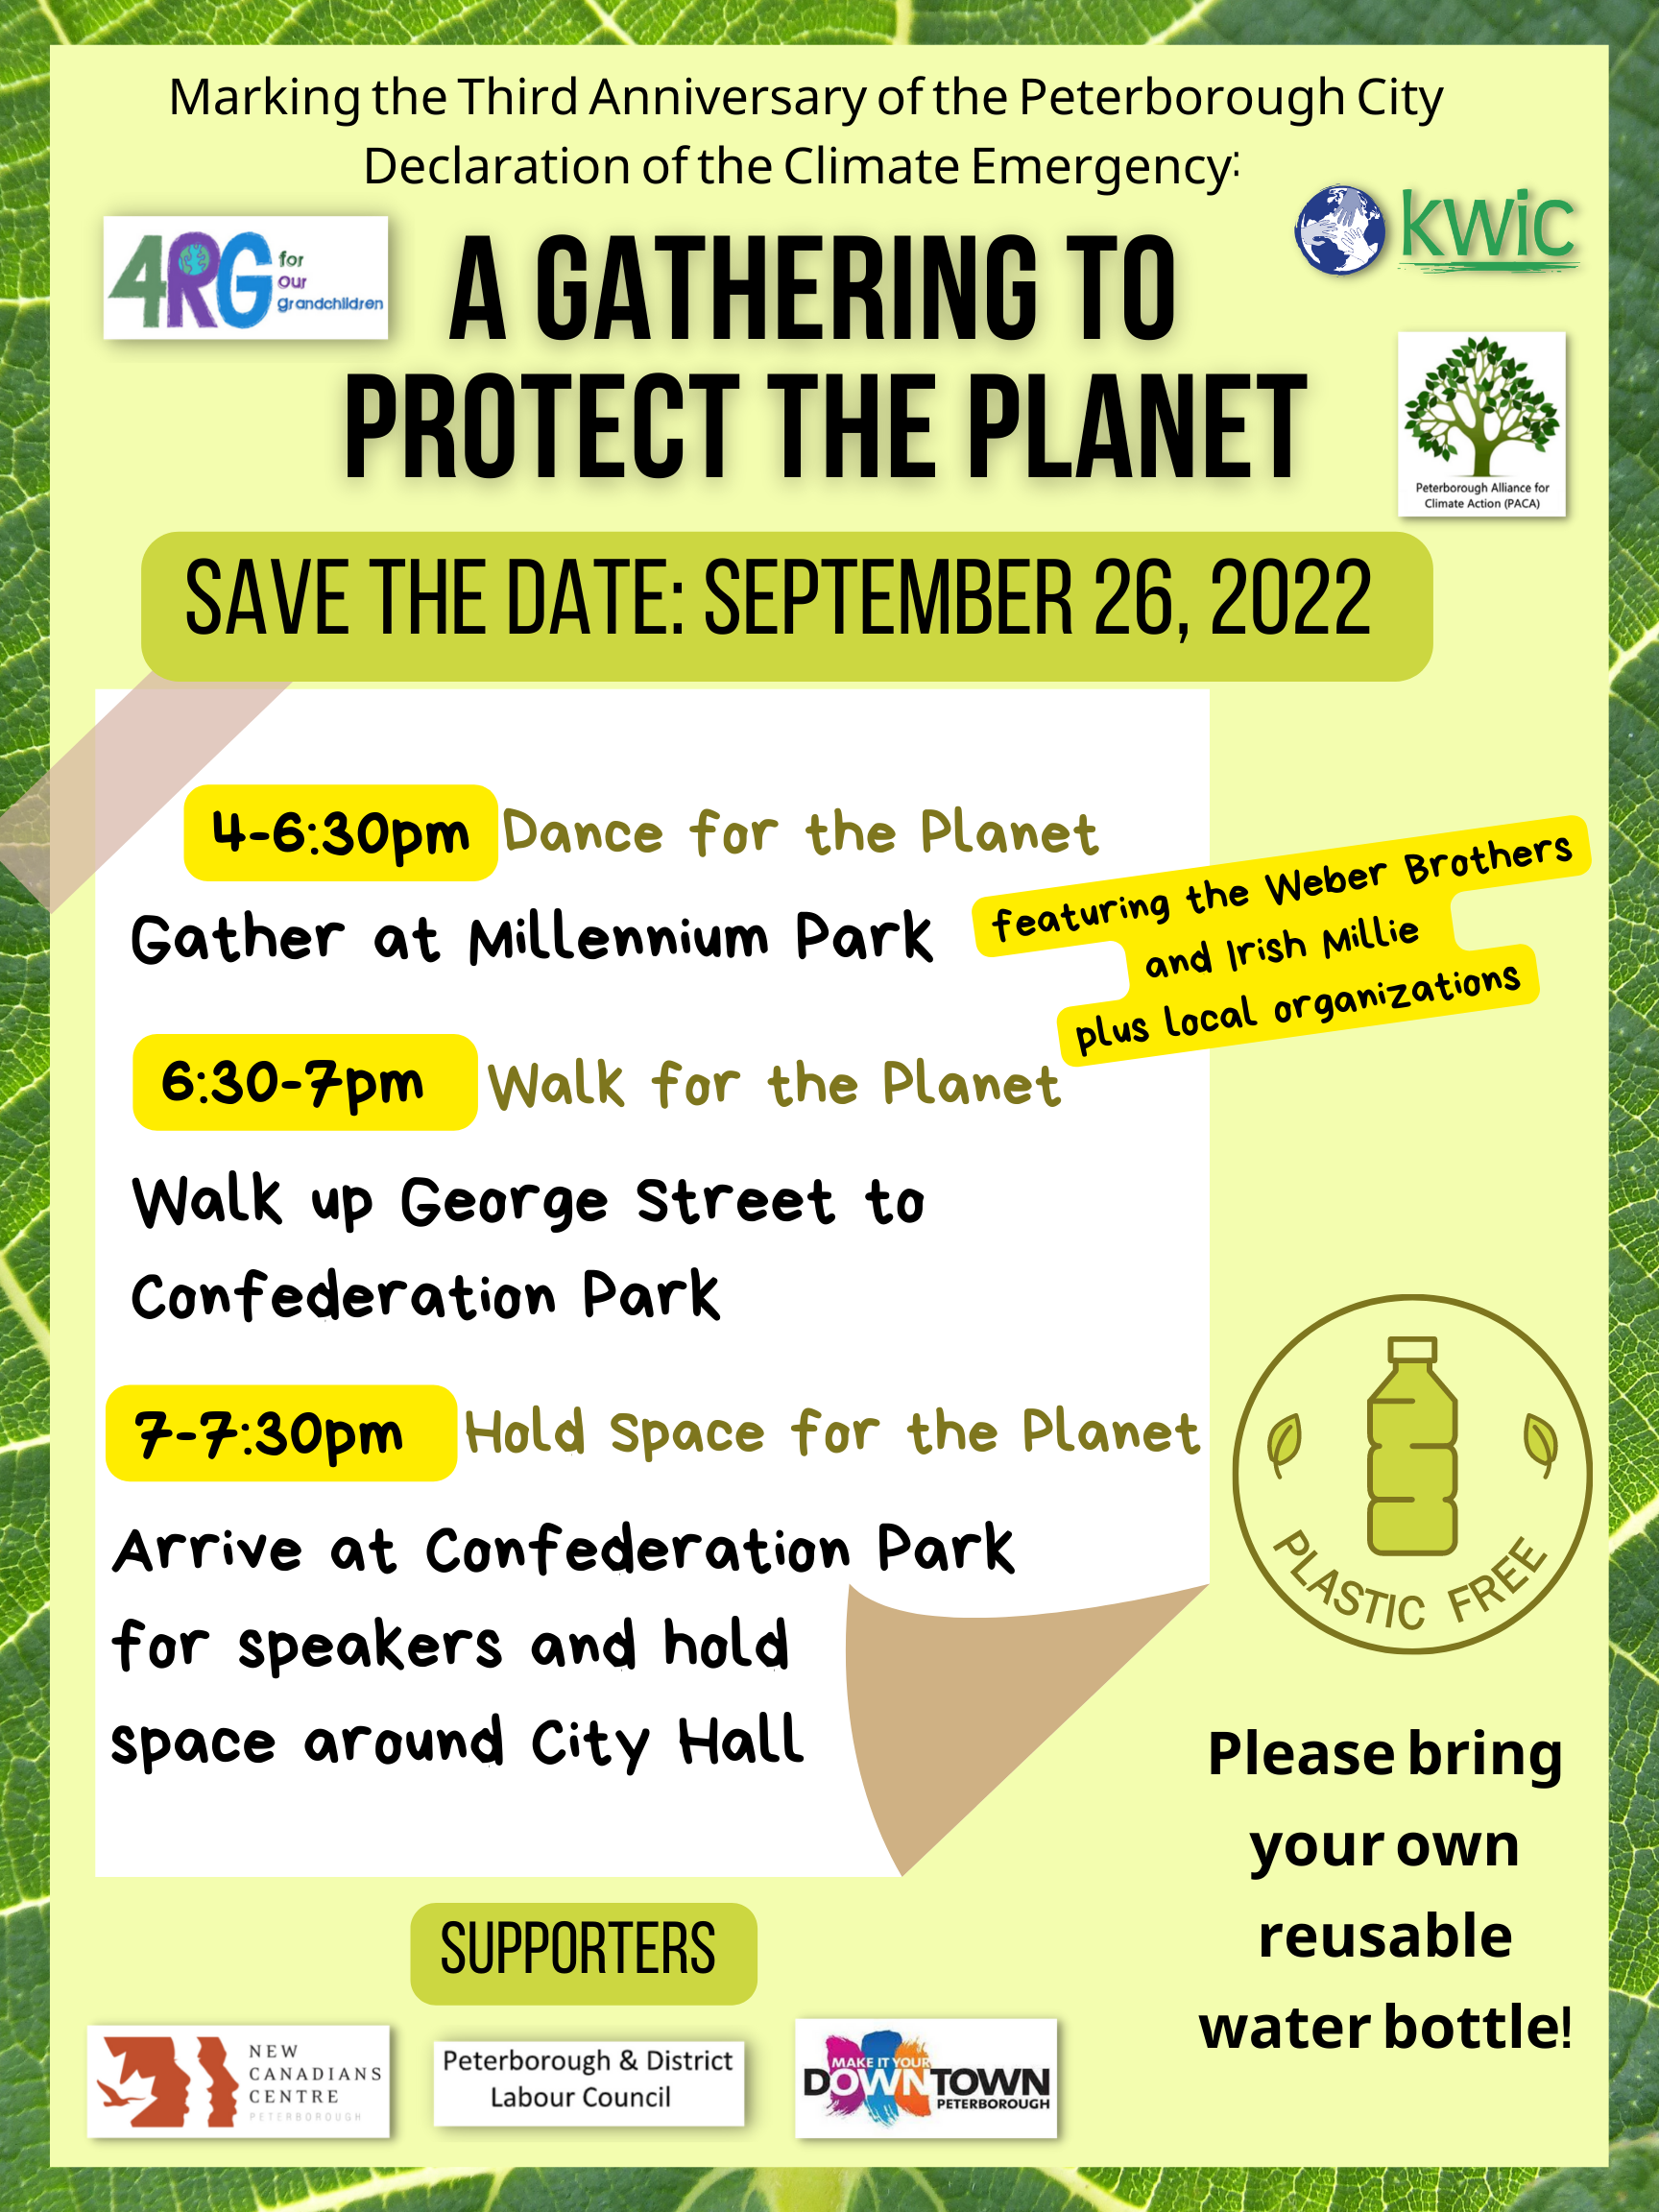 A save the date poster for the Gathering to Protect the Planet event on September 26, 2022